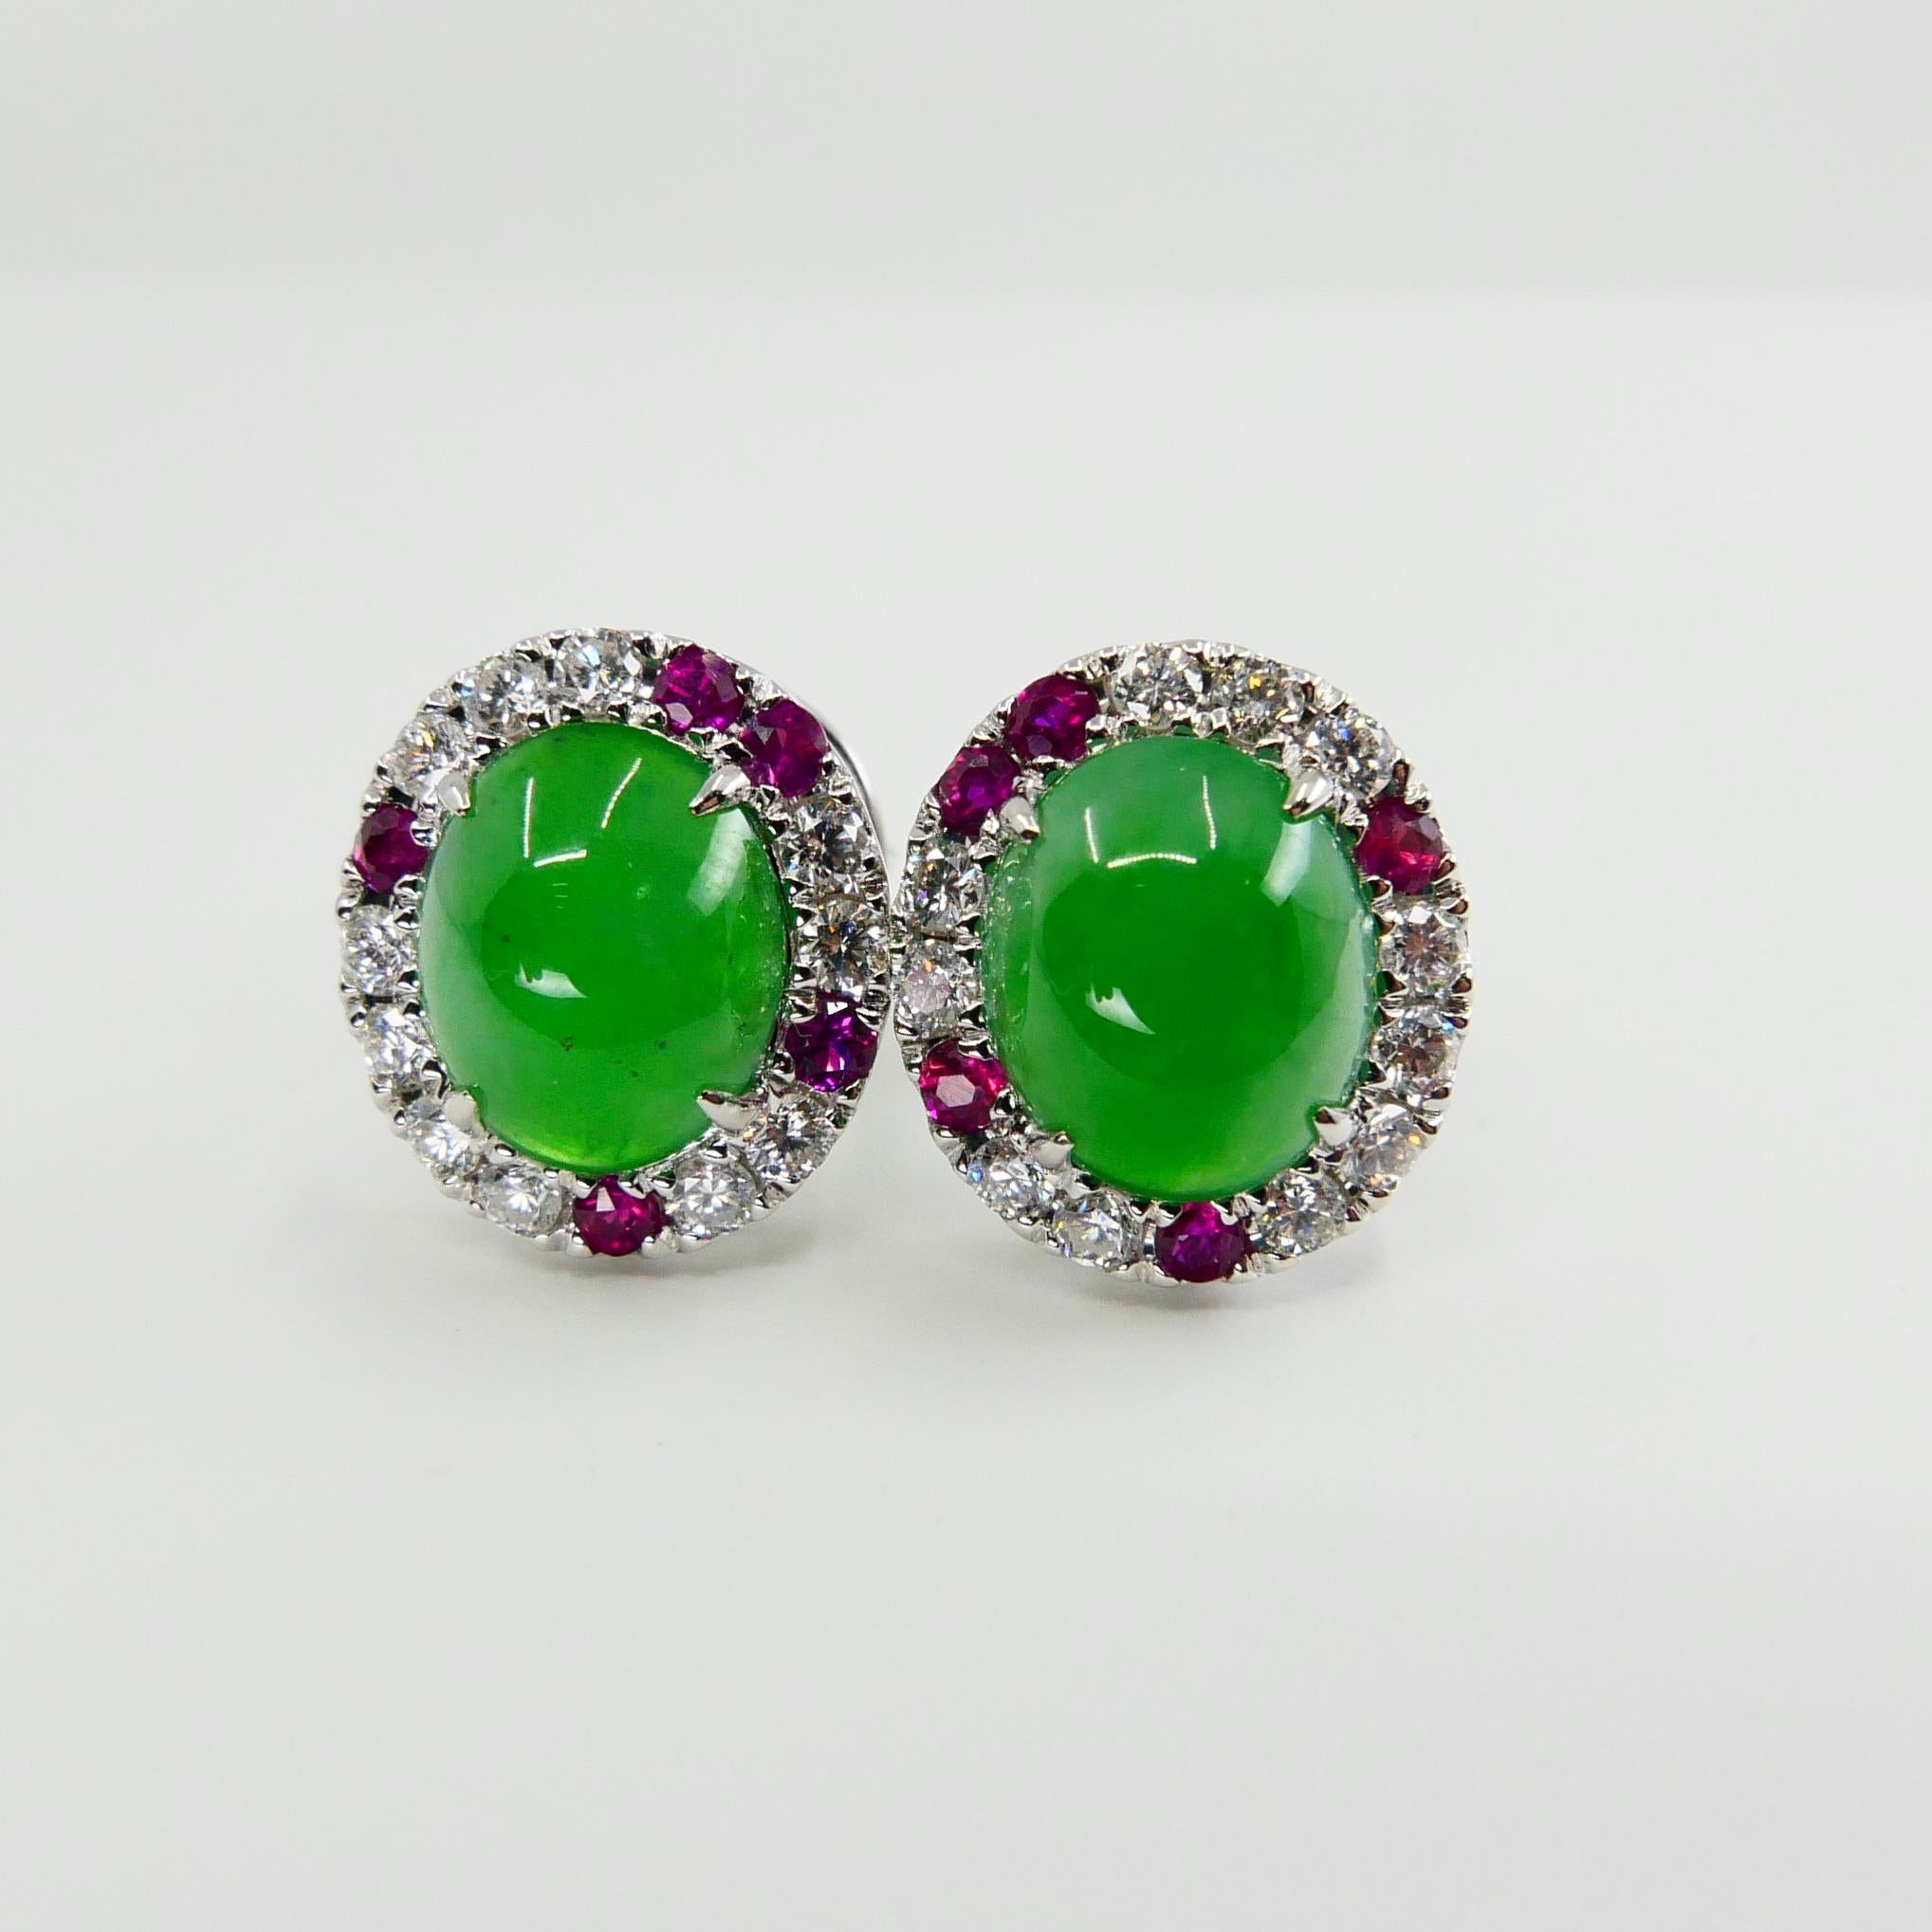 Certified Natural Type A Jade, Ruby and Diamond Stud Earrings, Apple Green Color 4